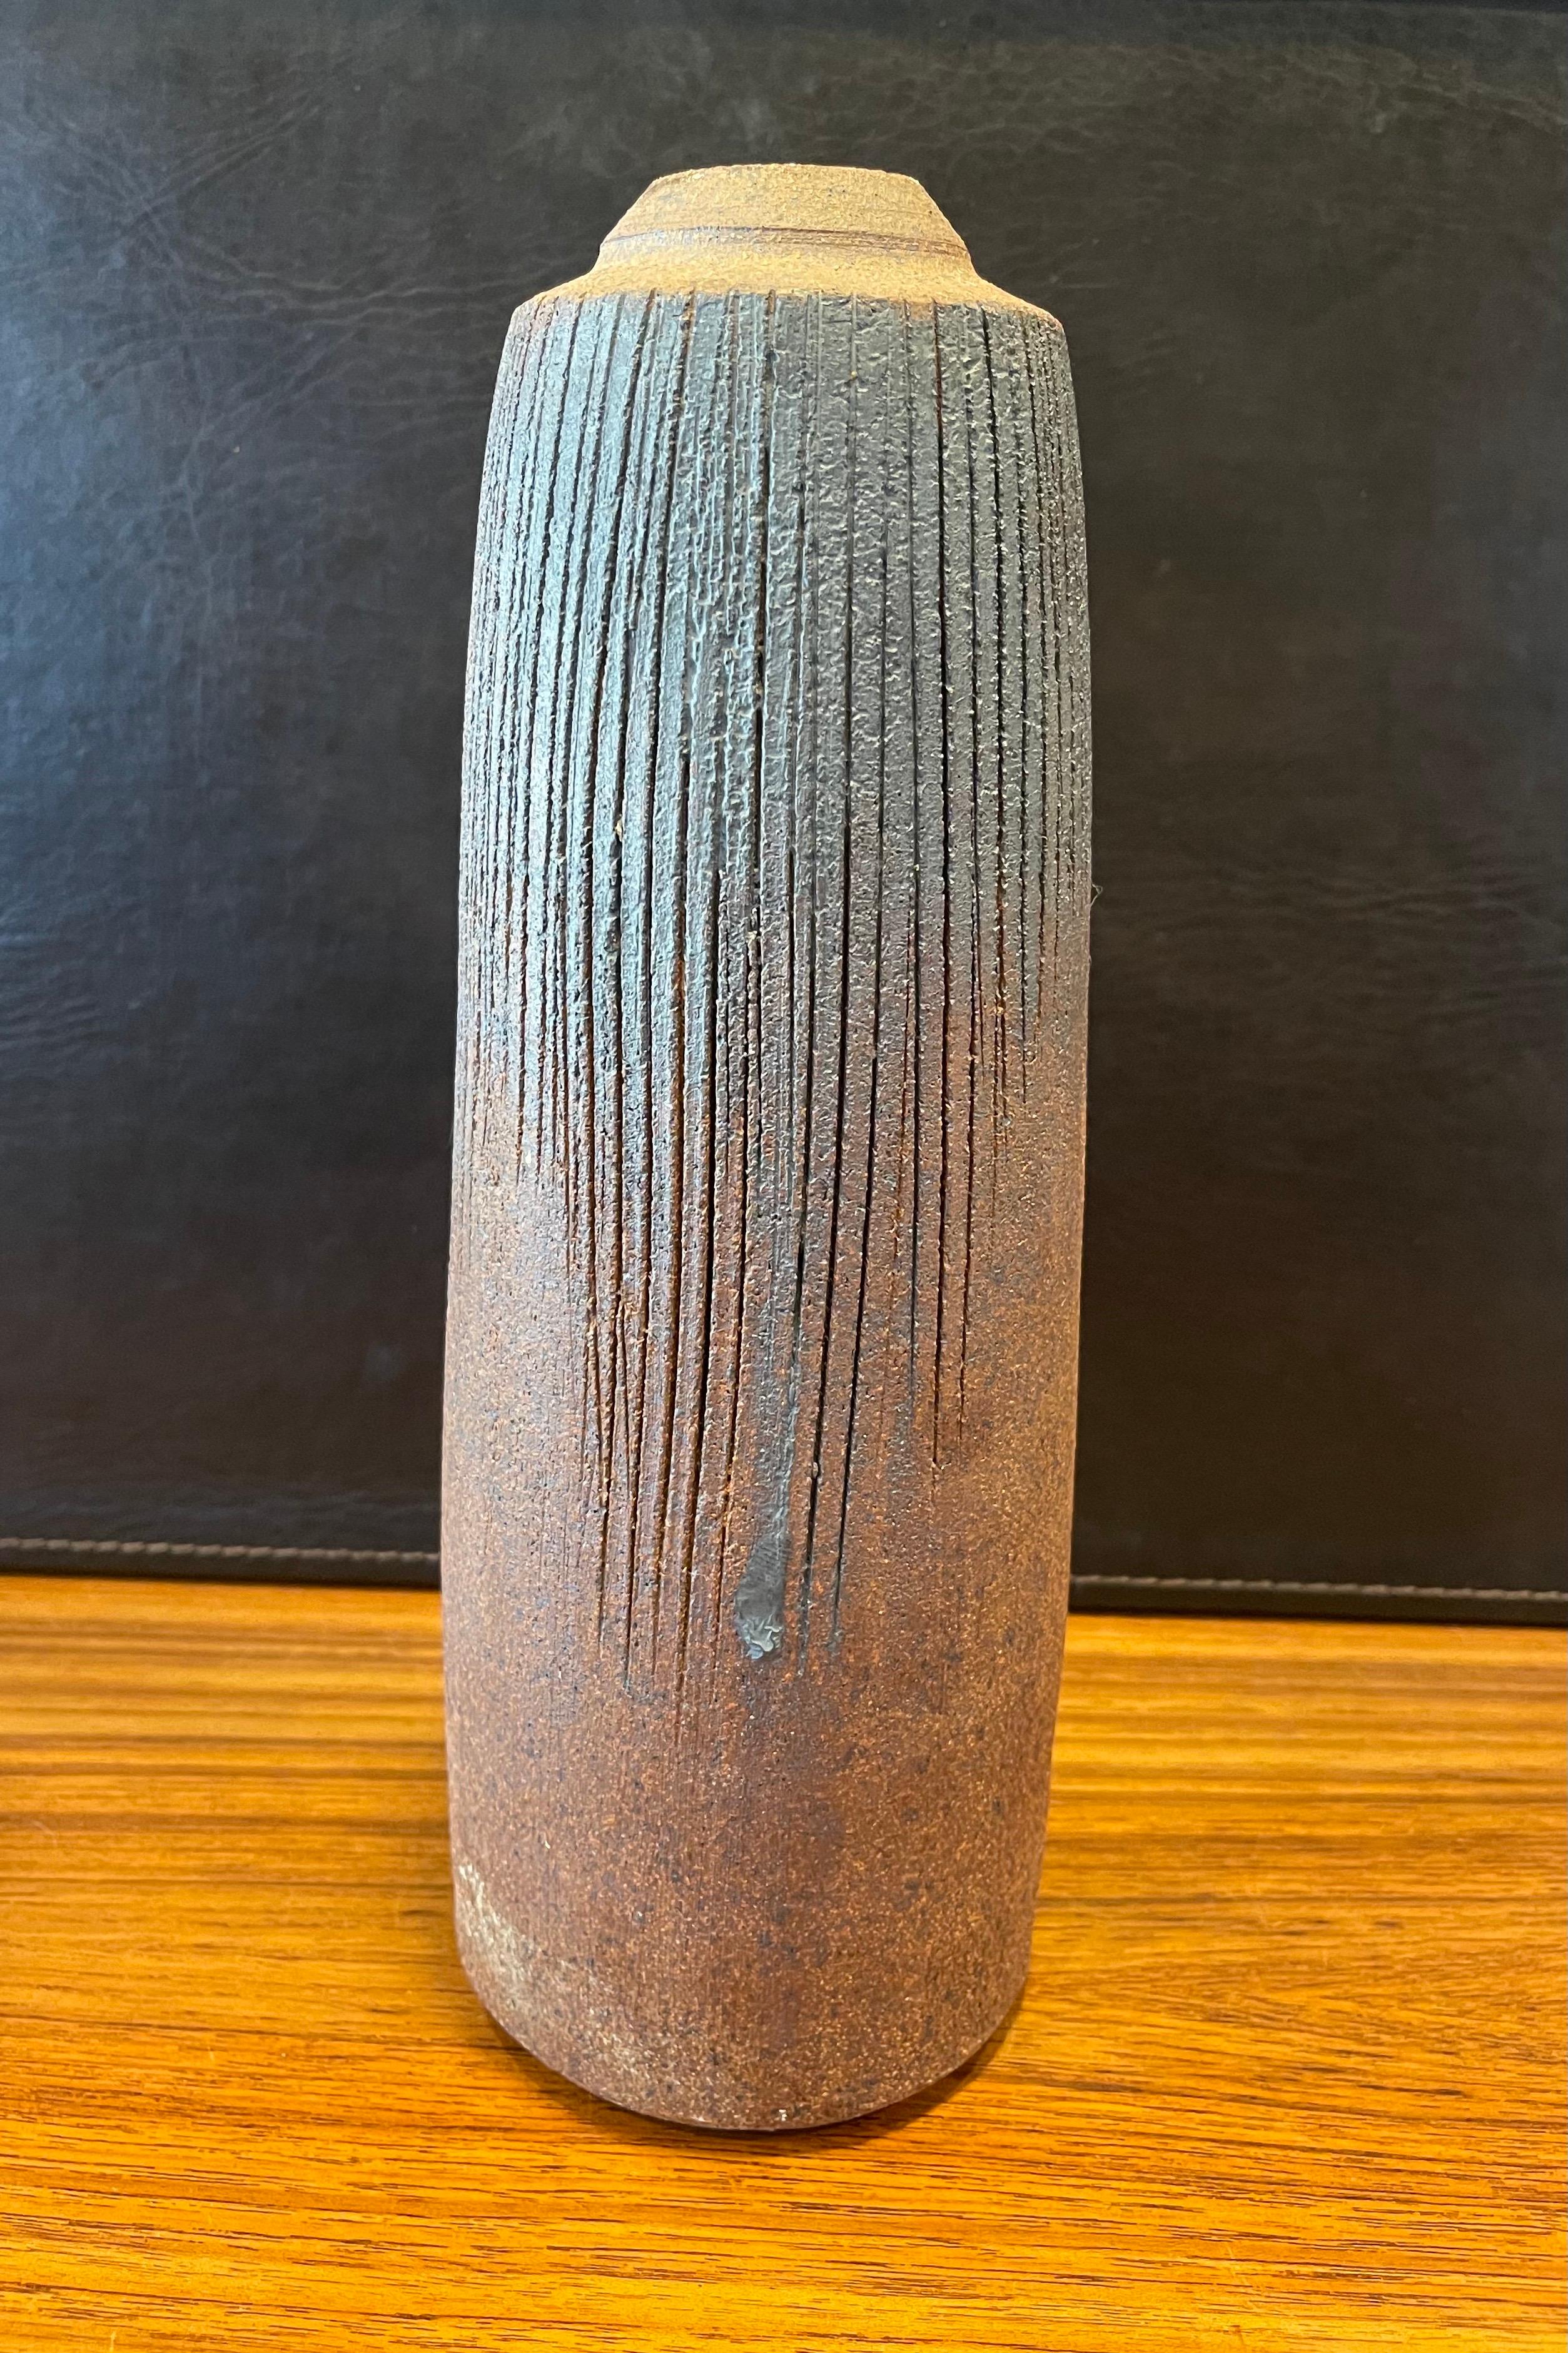 A very nice California studio pottery earthenware vase with beautiful grayish blue, tan and brown earth tones, circa 1970s. The vase has a wonderful design, look and form and is signed 